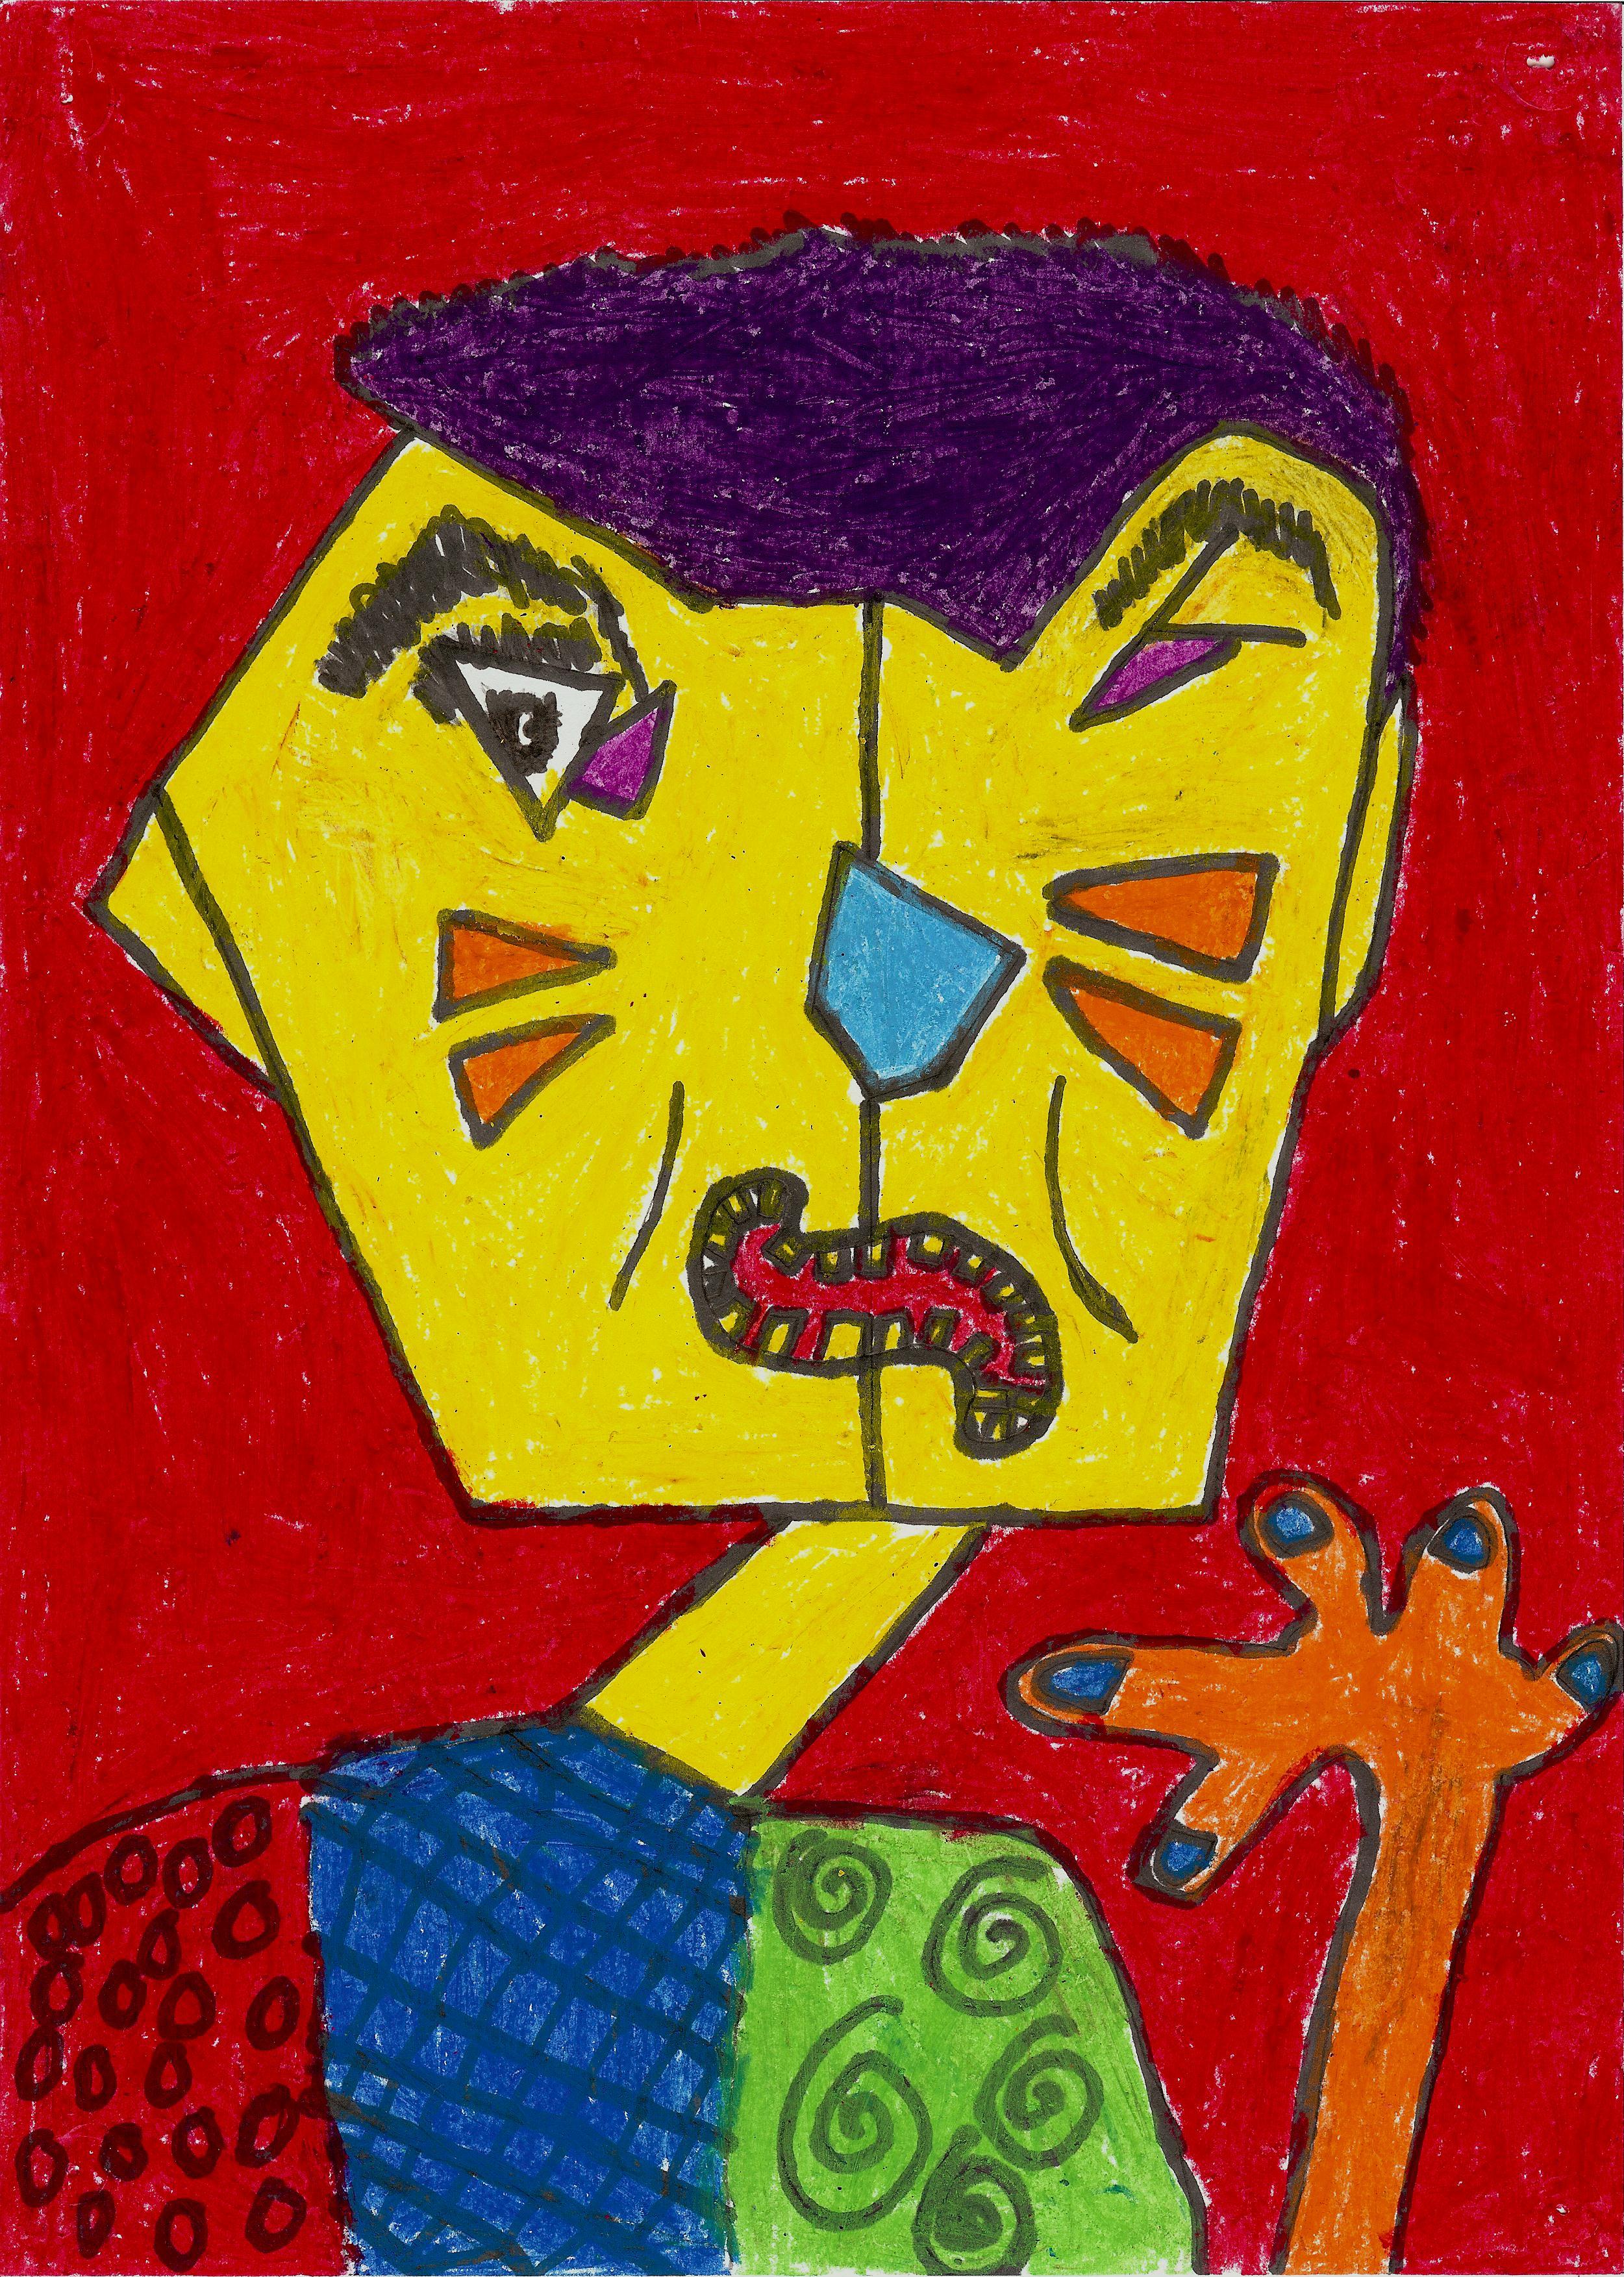 The Boy Who Cried Picasso